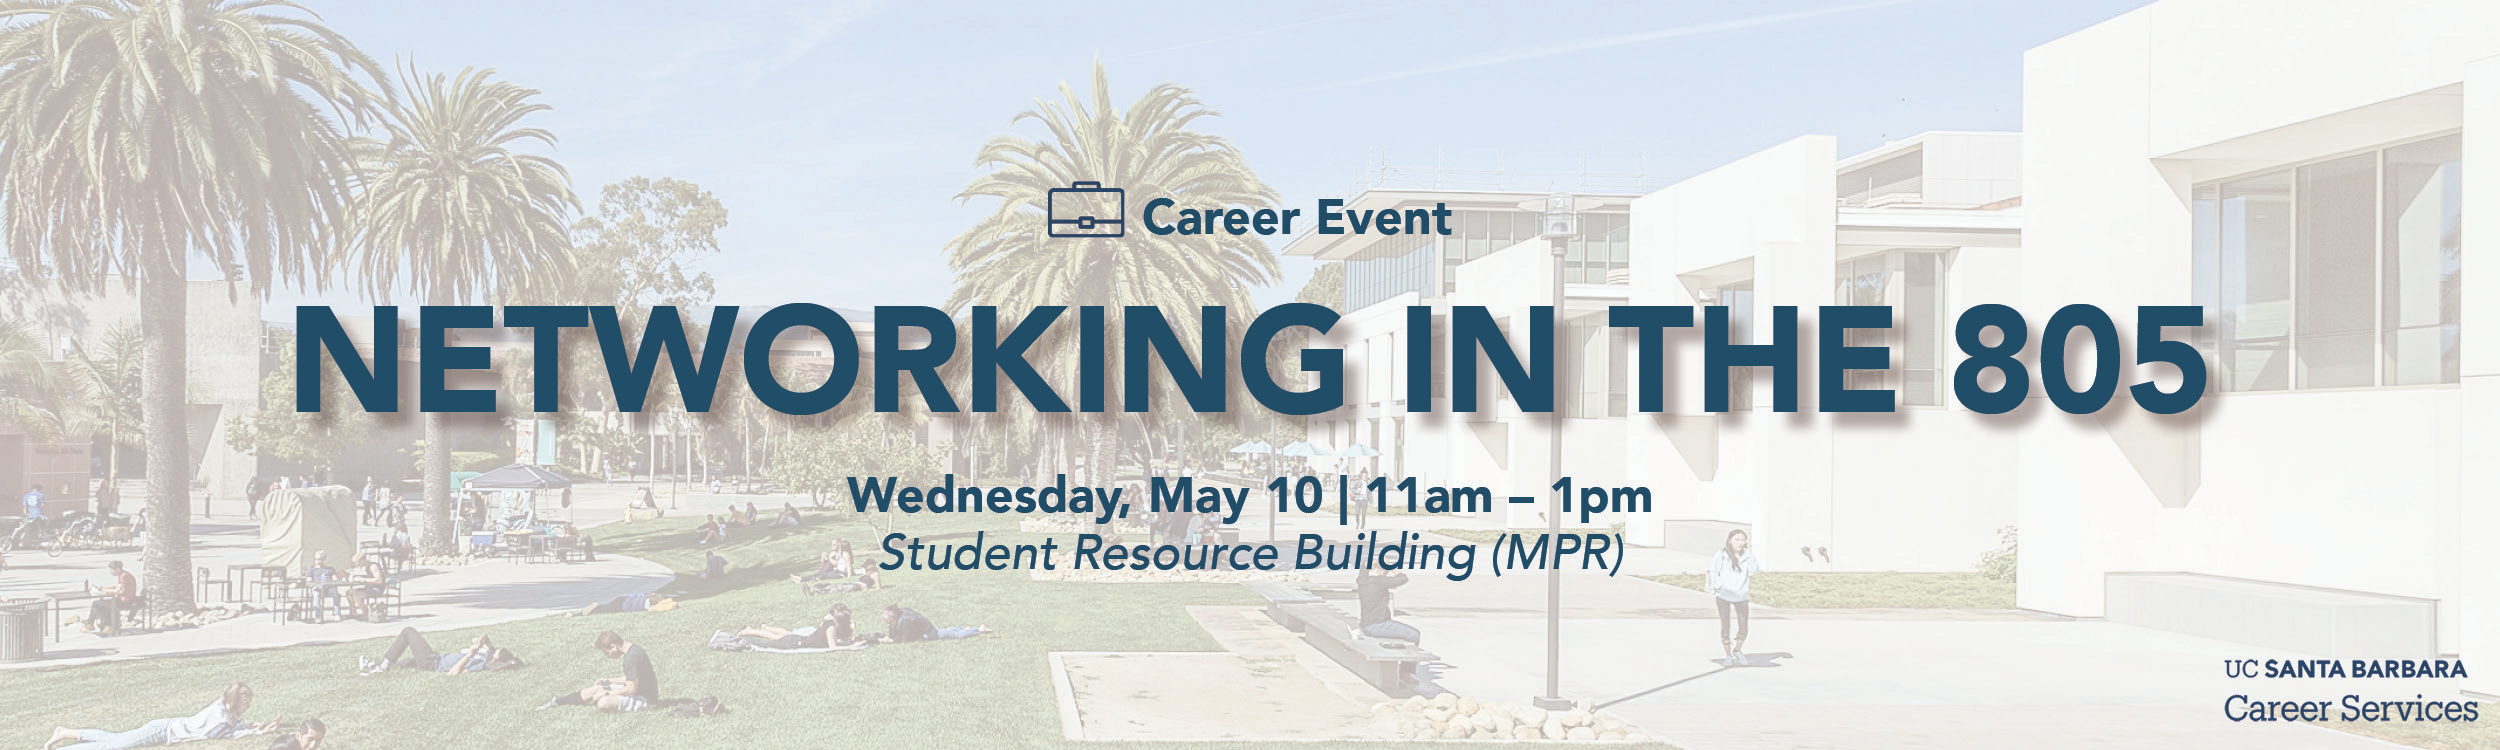 Networking in the 805, Wednesday, May 10 from 11am - 1pm, Student Resources Building, Multipurpose Room